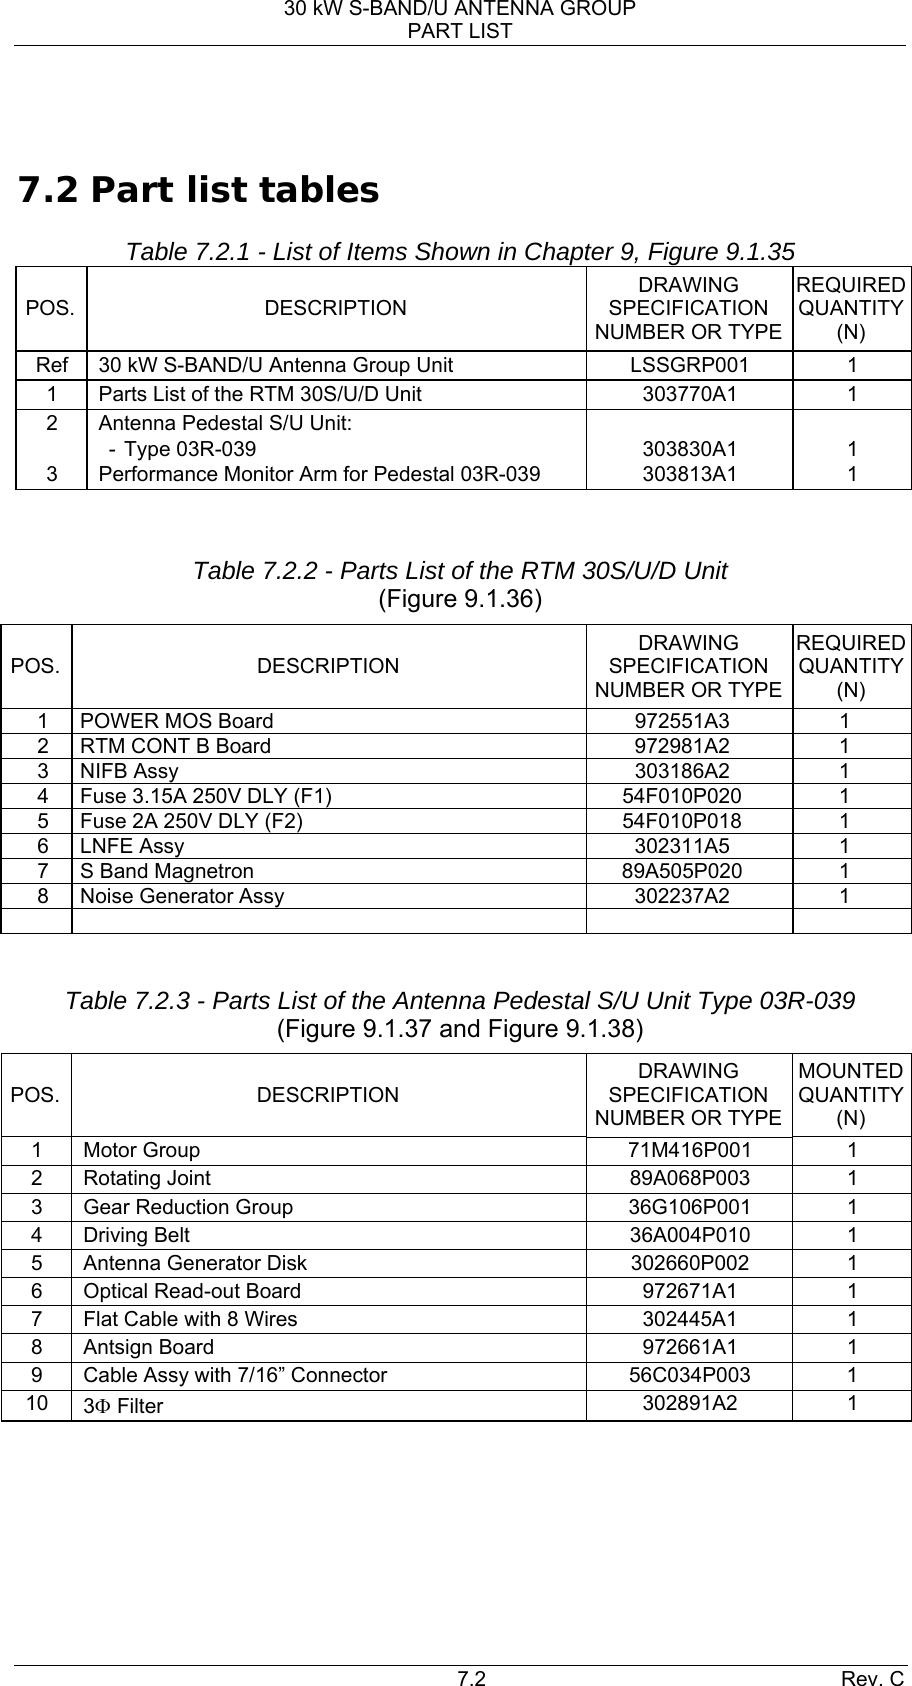 30 kW S-BAND/U ANTENNA GROUP PART LIST 7.2 Rev. C  7.2 Part list tables  Table 7.2.1 - List of Items Shown in Chapter 9, Figure 9.1.35   POS.  DESCRIPTION DRAWING SPECIFICATION NUMBER OR TYPE REQUIREDQUANTITY(N) Ref  30 kW S-BAND/U Antenna Group Unit  LSSGRP001  1 1  Parts List of the RTM 30S/U/D Unit  303770A1  1 2  Antenna Pedestal S/U Unit:      - Type 03R-039  303830A1  1 3  Performance Monitor Arm for Pedestal 03R-039  303813A1  1  Table 7.2.2 - Parts List of the RTM 30S/U/D Unit (Figure 9.1.36)  POS.  DESCRIPTION DRAWING SPECIFICATION NUMBER OR TYPE REQUIREDQUANTITY(N) 1  POWER MOS Board  972551A3  1 2  RTM CONT B Board  972981A2  1 3 NIFB Assy  303186A2  1 4  Fuse 3.15A 250V DLY (F1)  54F010P020  1 5  Fuse 2A 250V DLY (F2)  54F010P018  1 6 LNFE Assy  302311A5  1 7  S Band Magnetron  89A505P020  1 8  Noise Generator Assy  302237A2  1        Table 7.2.3 - Parts List of the Antenna Pedestal S/U Unit Type 03R-039 (Figure 9.1.37 and Figure 9.1.38)  POS.  DESCRIPTION DRAWING SPECIFICATION NUMBER OR TYPE MOUNTEDQUANTITY(N) 1 Motor Group  71M416P001  1 2 Rotating Joint  89A068P003  1 3  Gear Reduction Group  36G106P001  1 4 Driving Belt  36A004P010  1 5  Antenna Generator Disk  302660P002  1 6  Optical Read-out Board  972671A1  1 7  Flat Cable with 8 Wires  302445A1  1 8 Antsign Board  972661A1  1 9  Cable Assy with 7/16” Connector  56C034P003  1 10  3Φ Filter  302891A2 1  